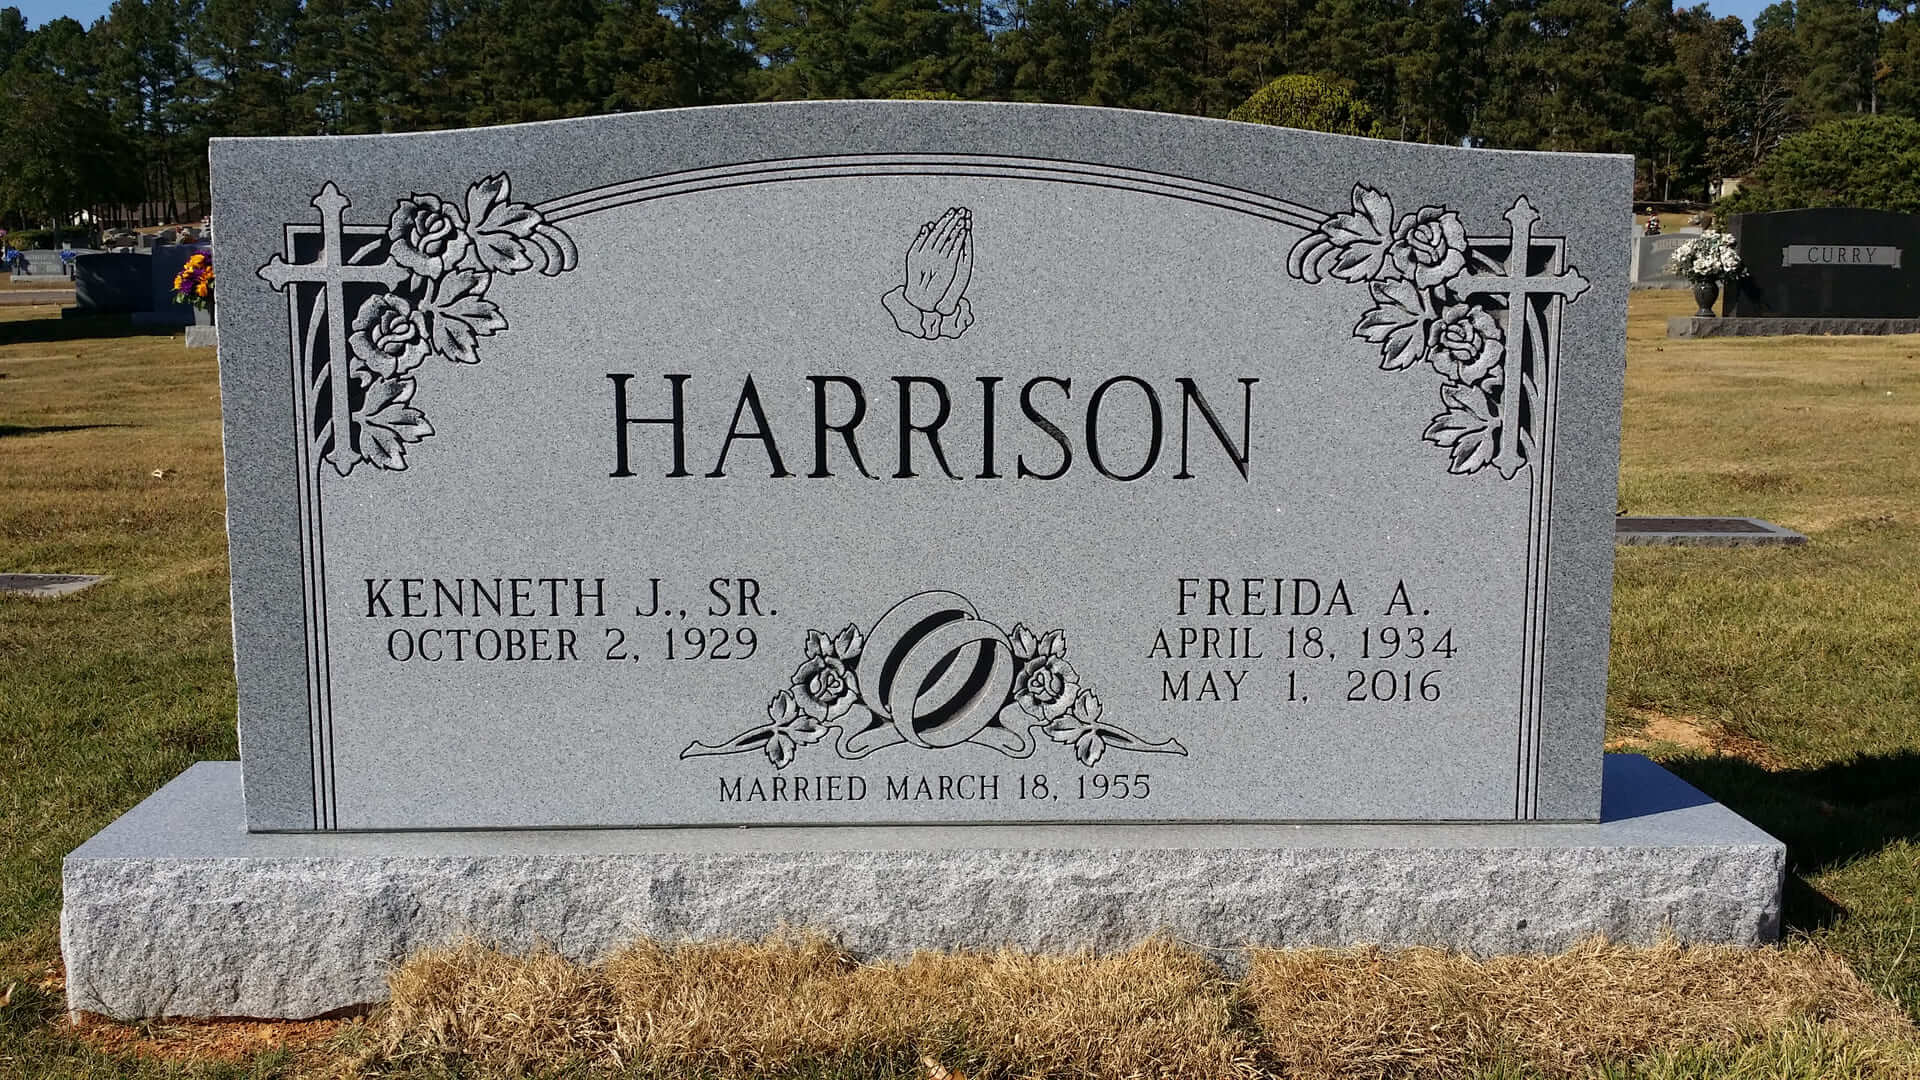 A memorial slab for Harrison at the graveyard